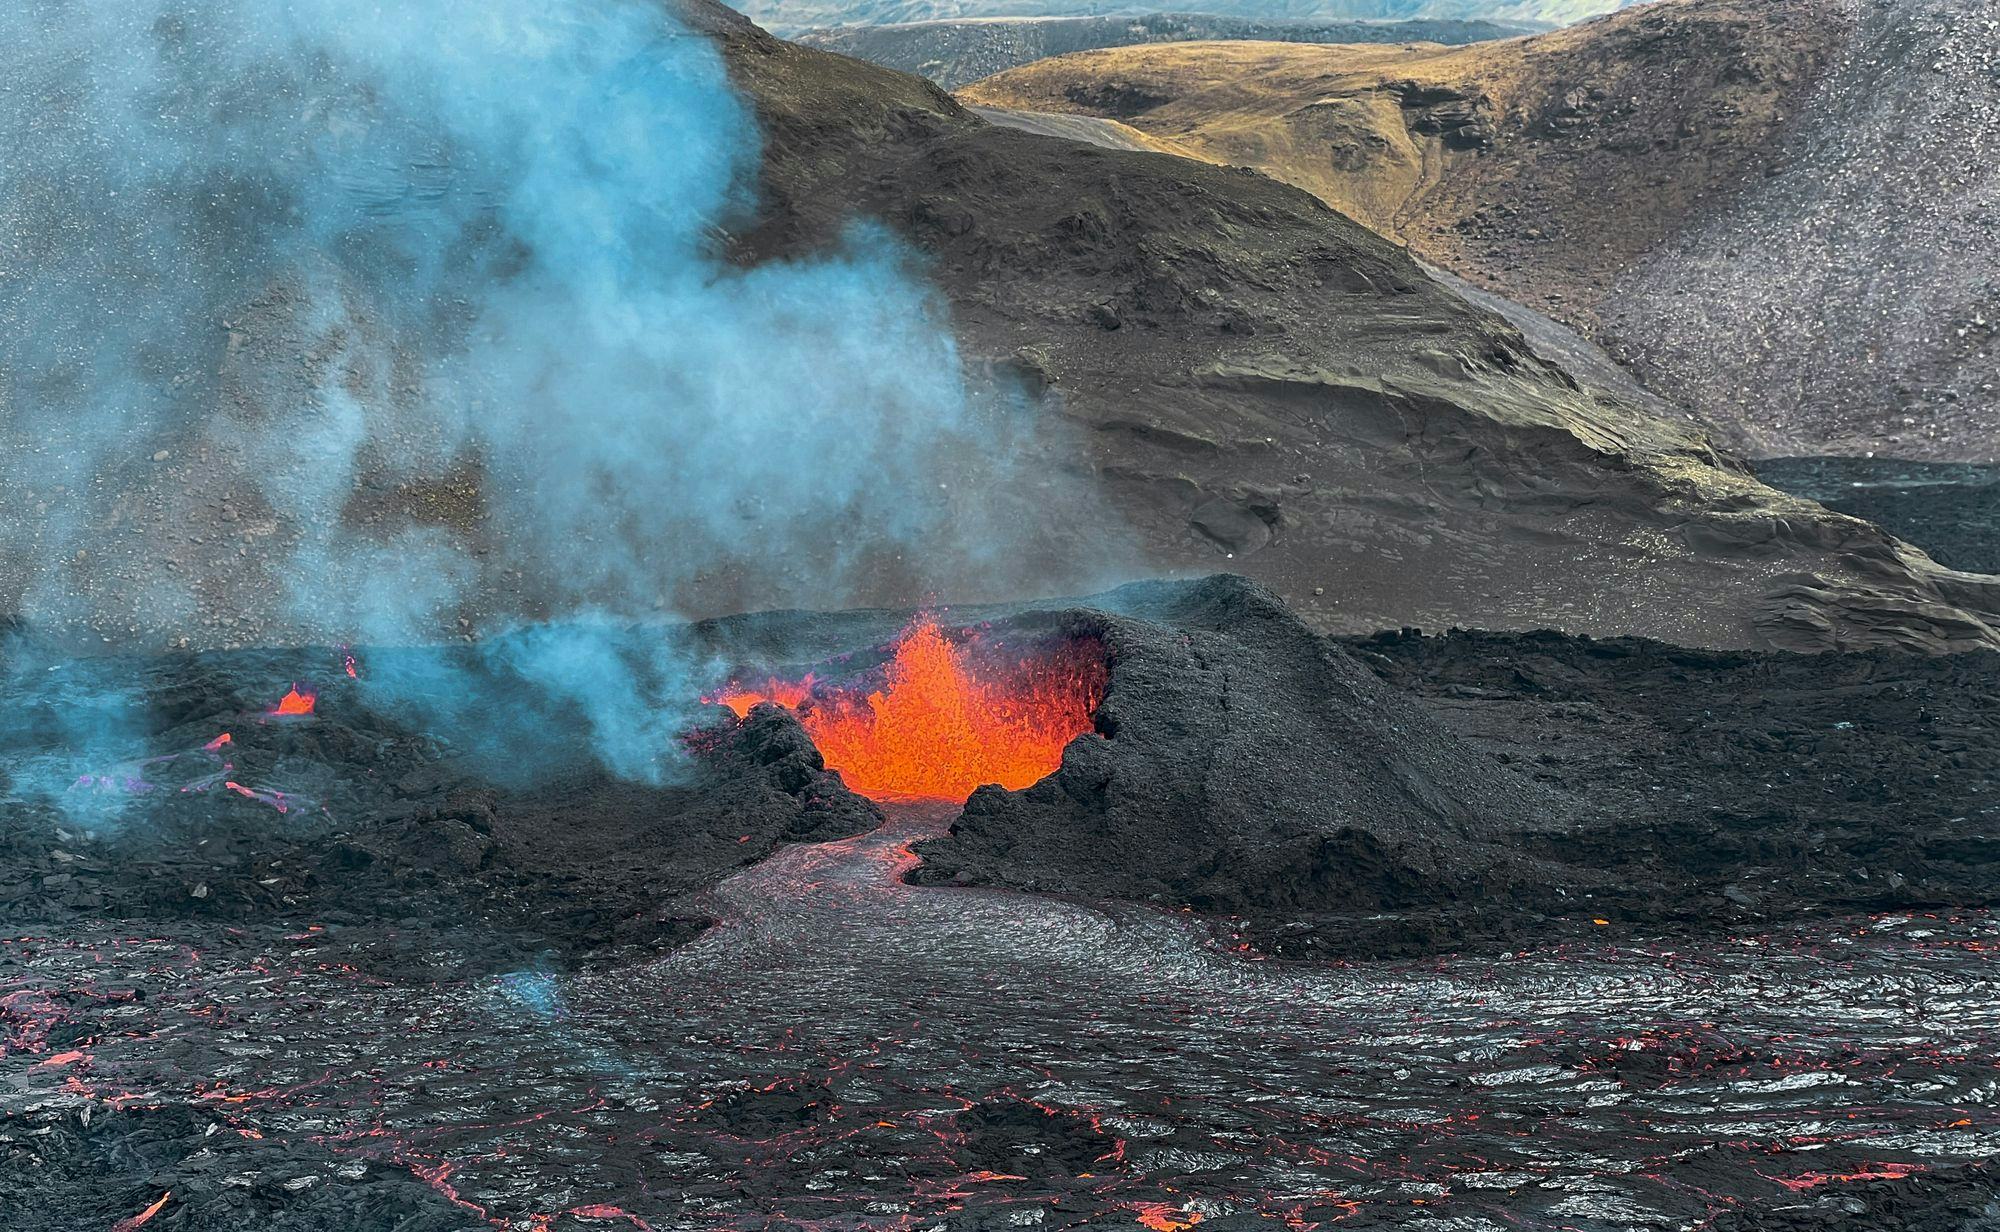 Lava erupting and flowing from a volcano crater